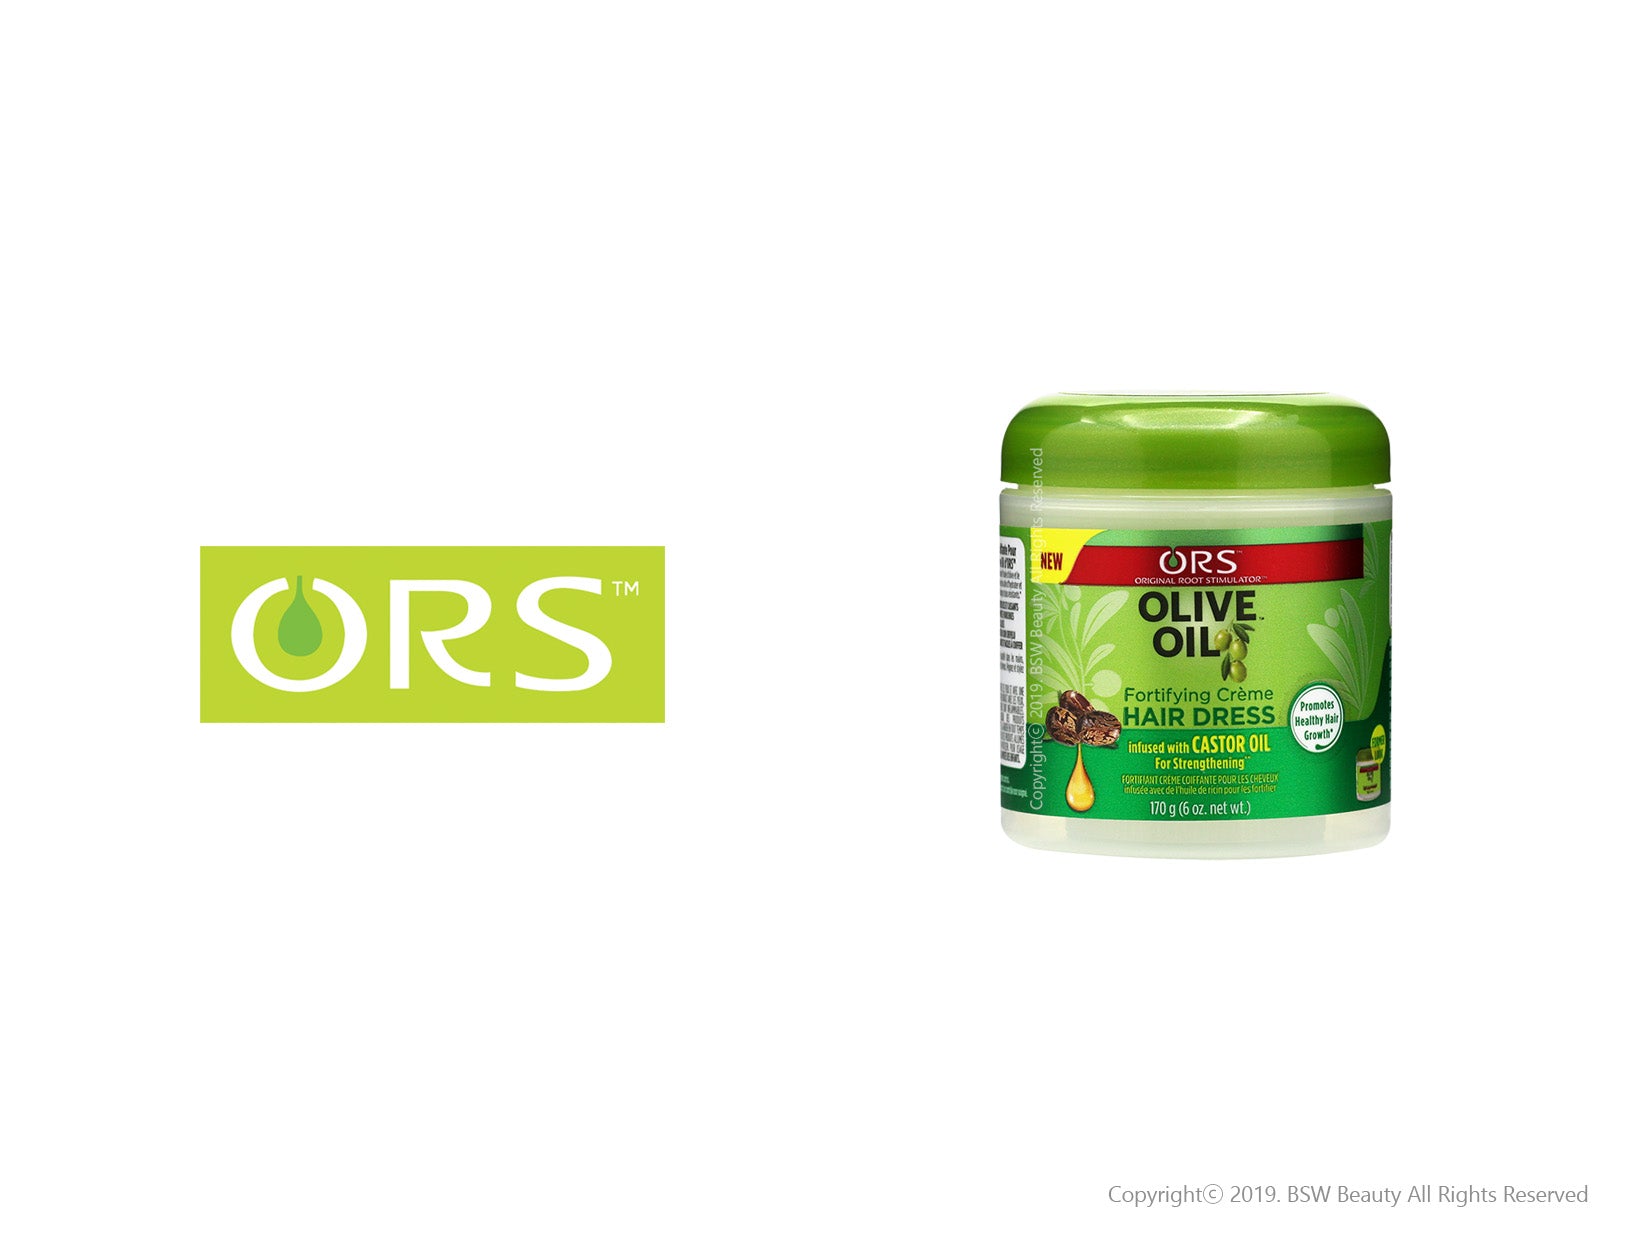 ORS Olive Oil Fortifying Creme Hair Dress (8 oz.)